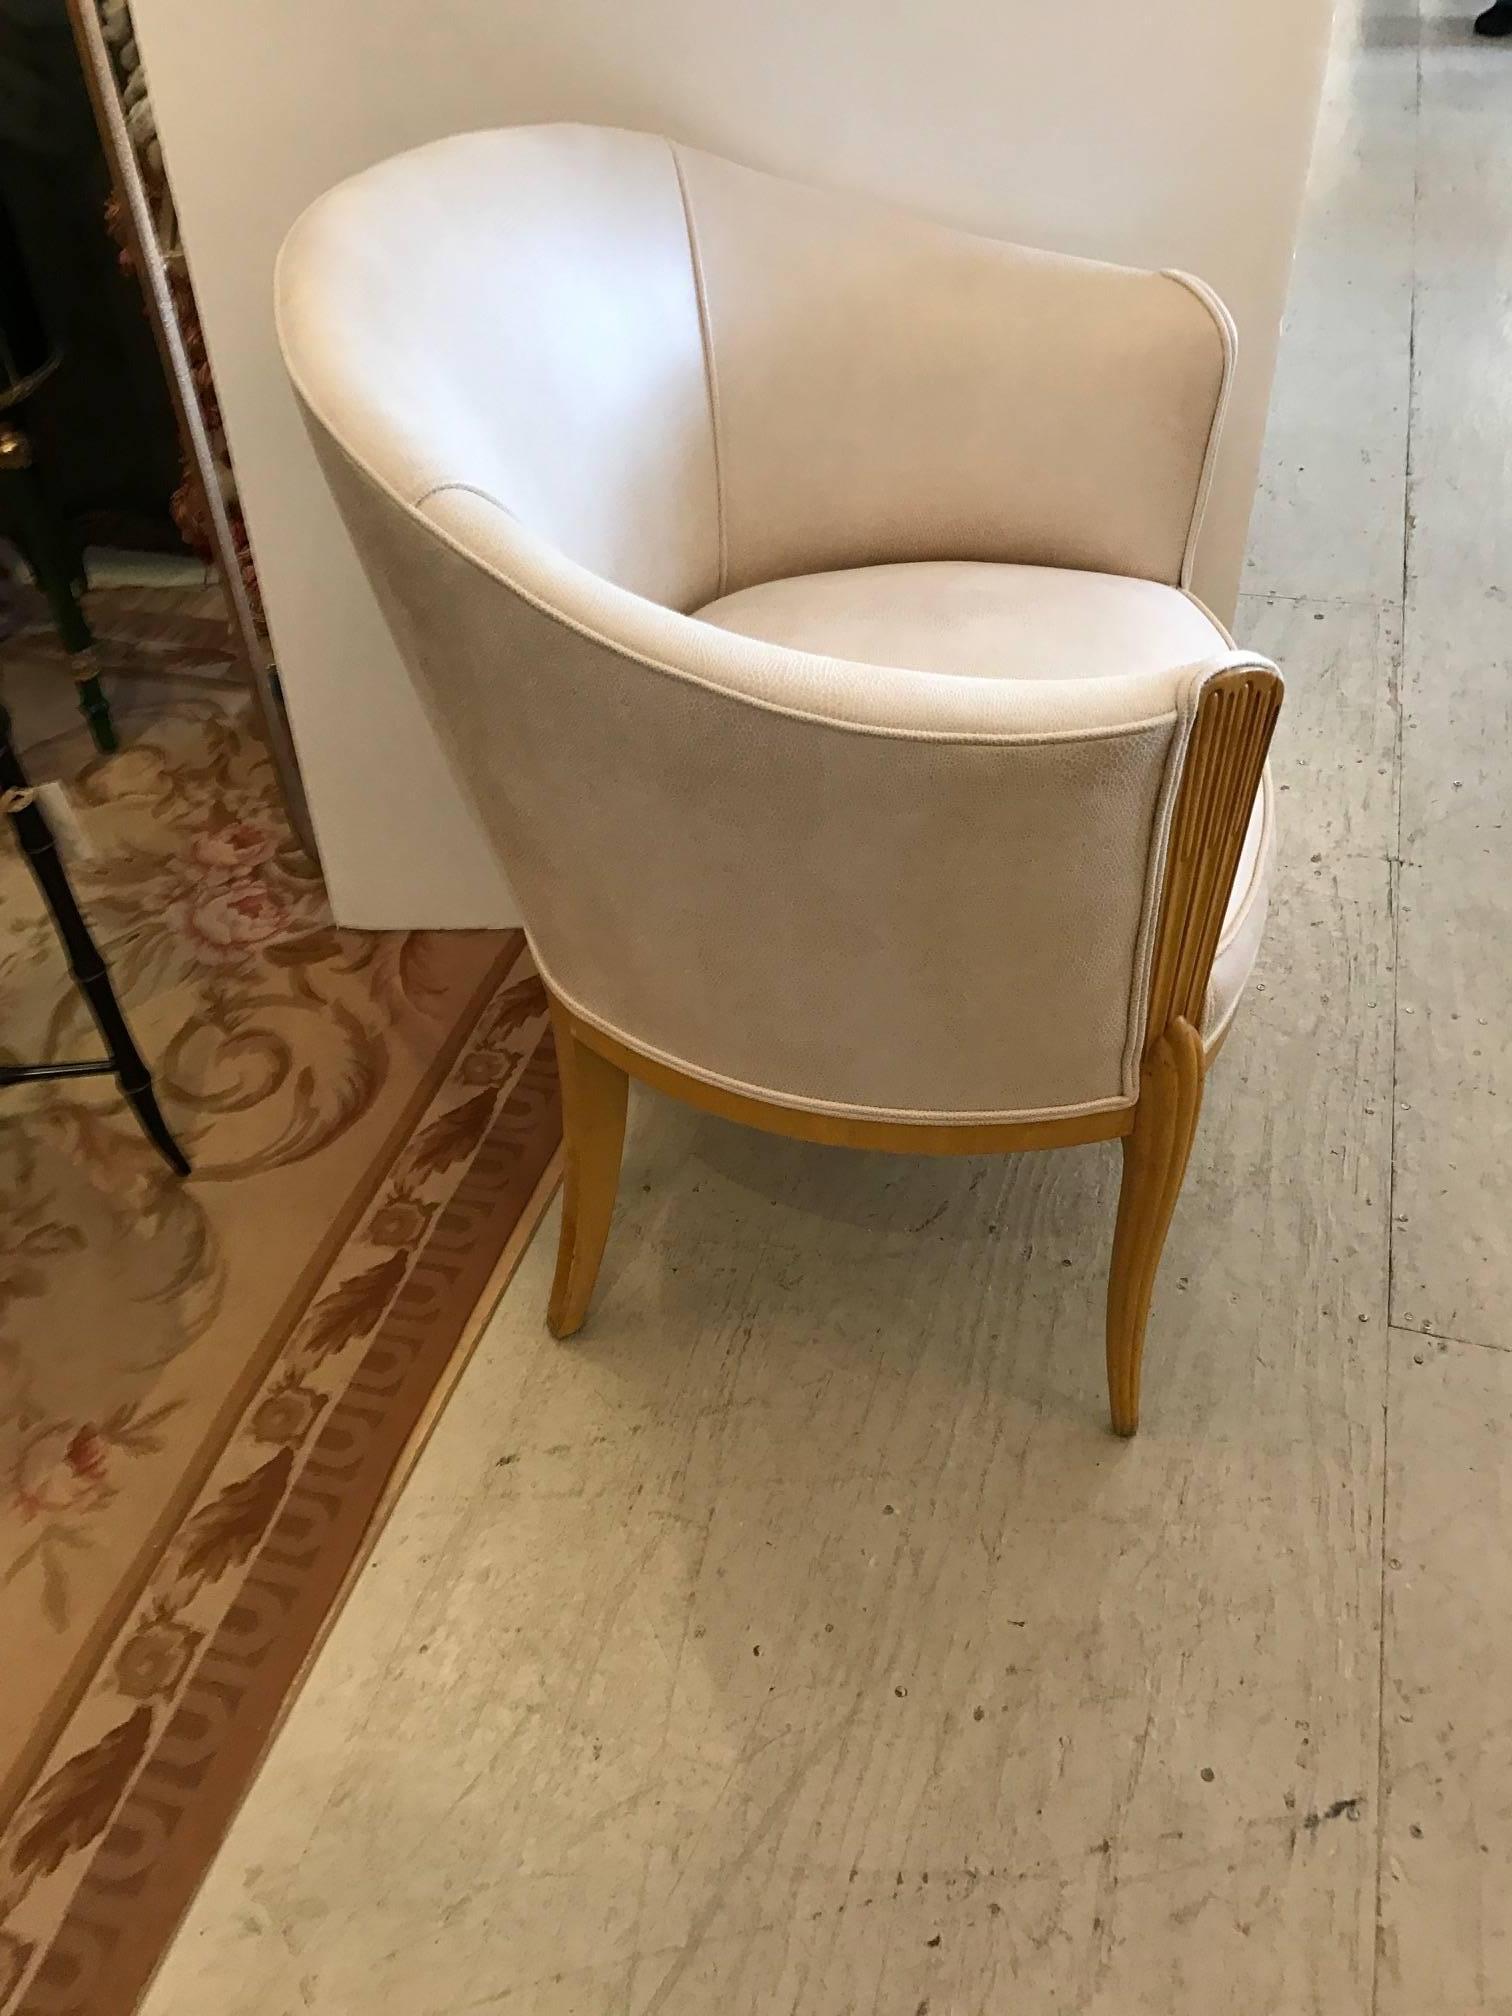 Glamorous deco chair with lovely blonde carved wood, curved on the back and newly updated with neutral tone on tone faux snakeskin upholstery and double welting. Seat depth 19".